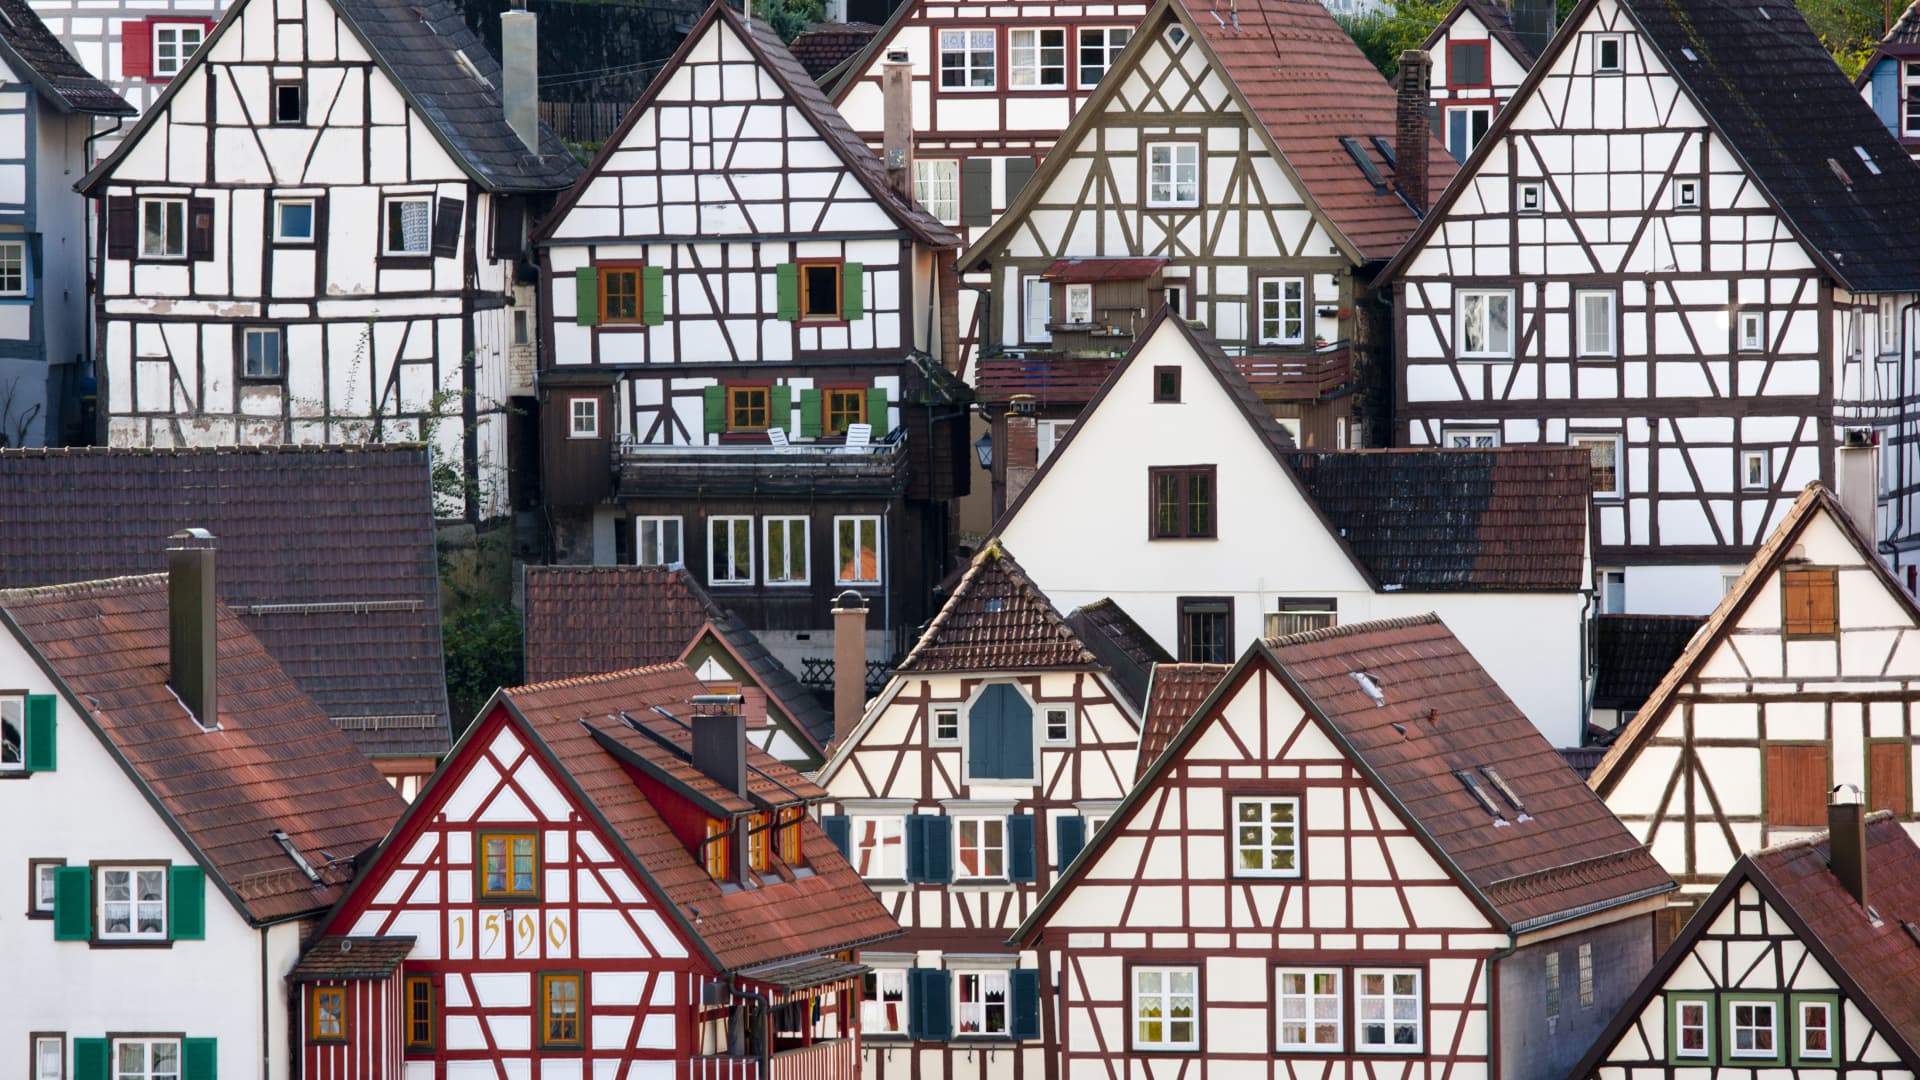 Germany’s housing market is dealing with a severe downturn in costs, analysts say